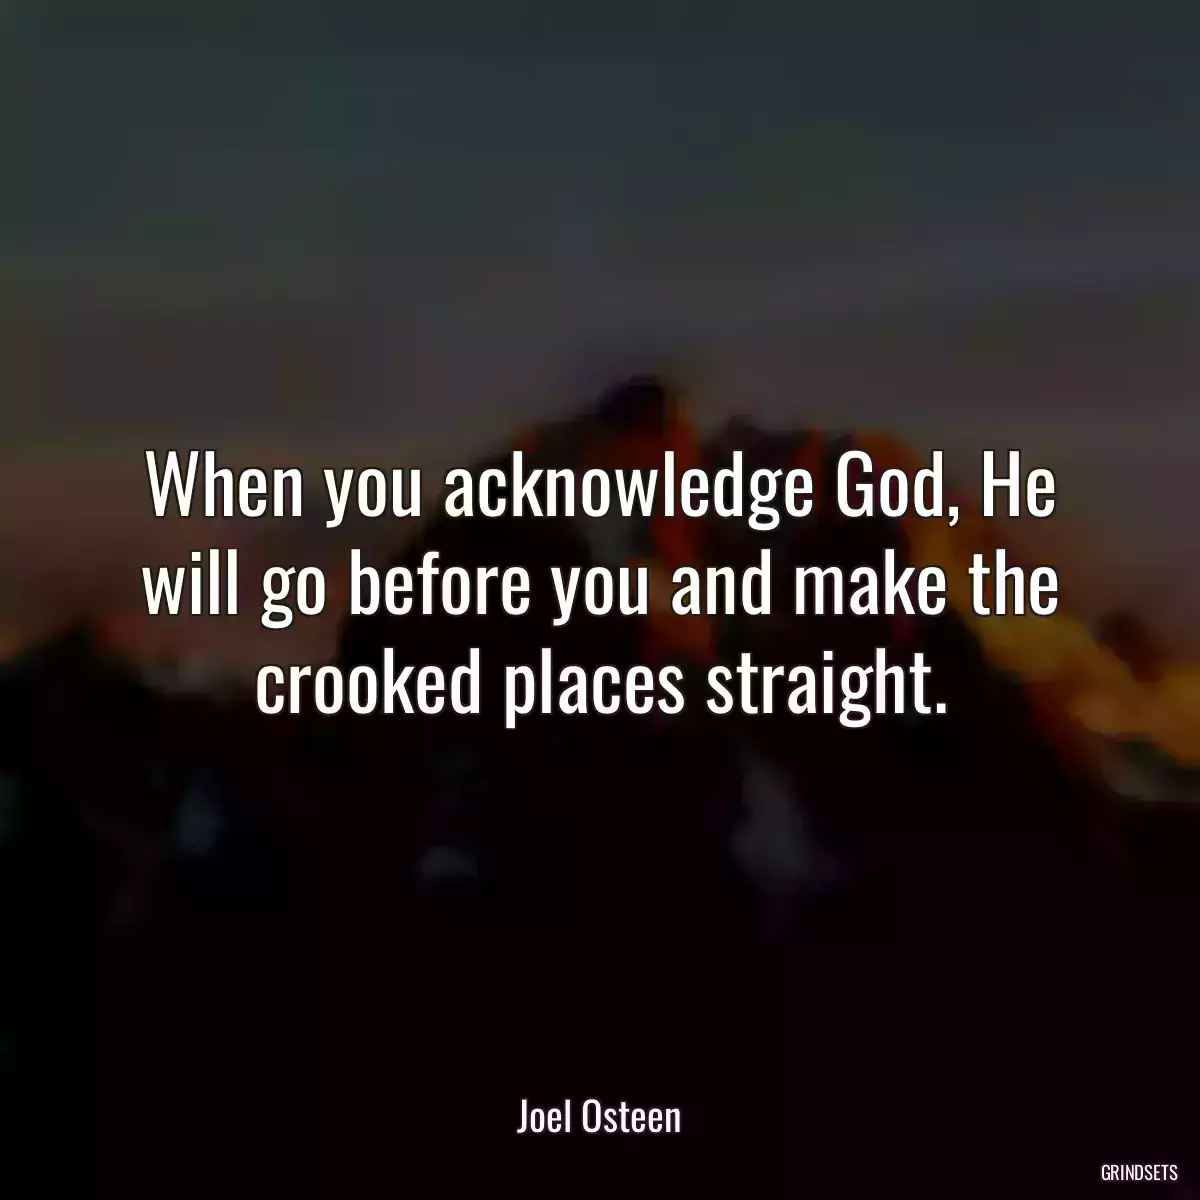 When you acknowledge God, He will go before you and make the crooked places straight.